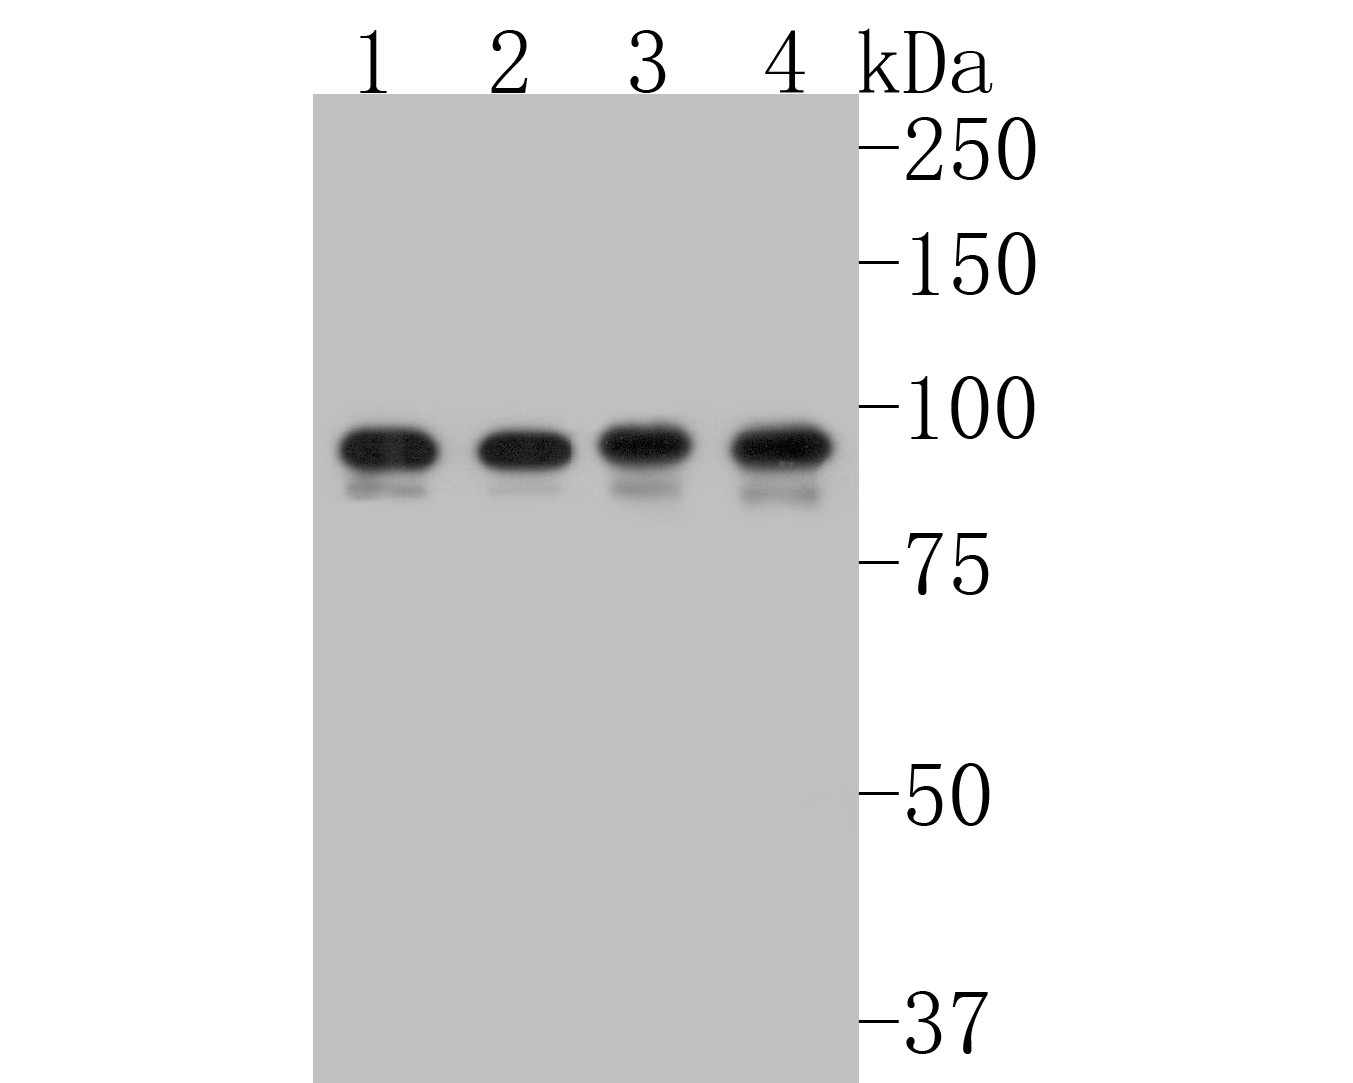 Western blot analysis of Phospho-STAT3(S727) on different lysates. Proteins were transferred to a PVDF membrane and blocked with 5% BSA in PBS for 1 hour at room temperature. The primary antibody (ET1607-39, 1/500) was used in 5% BSA at room temperature for 2 hours. Goat Anti-Rabbit IgG - HRP Secondary Antibody (HA1001) at 1:5,000 dilution was used for 1 hour at room temperature.<br />
Positive control: <br />
Lane 1: Hela cell lysate<br />
Lane 2: A431 cell lysate<br />
Lane 3: NIH/3T3 cell lysate<br />
Lane 4: Jurkat cell lysate